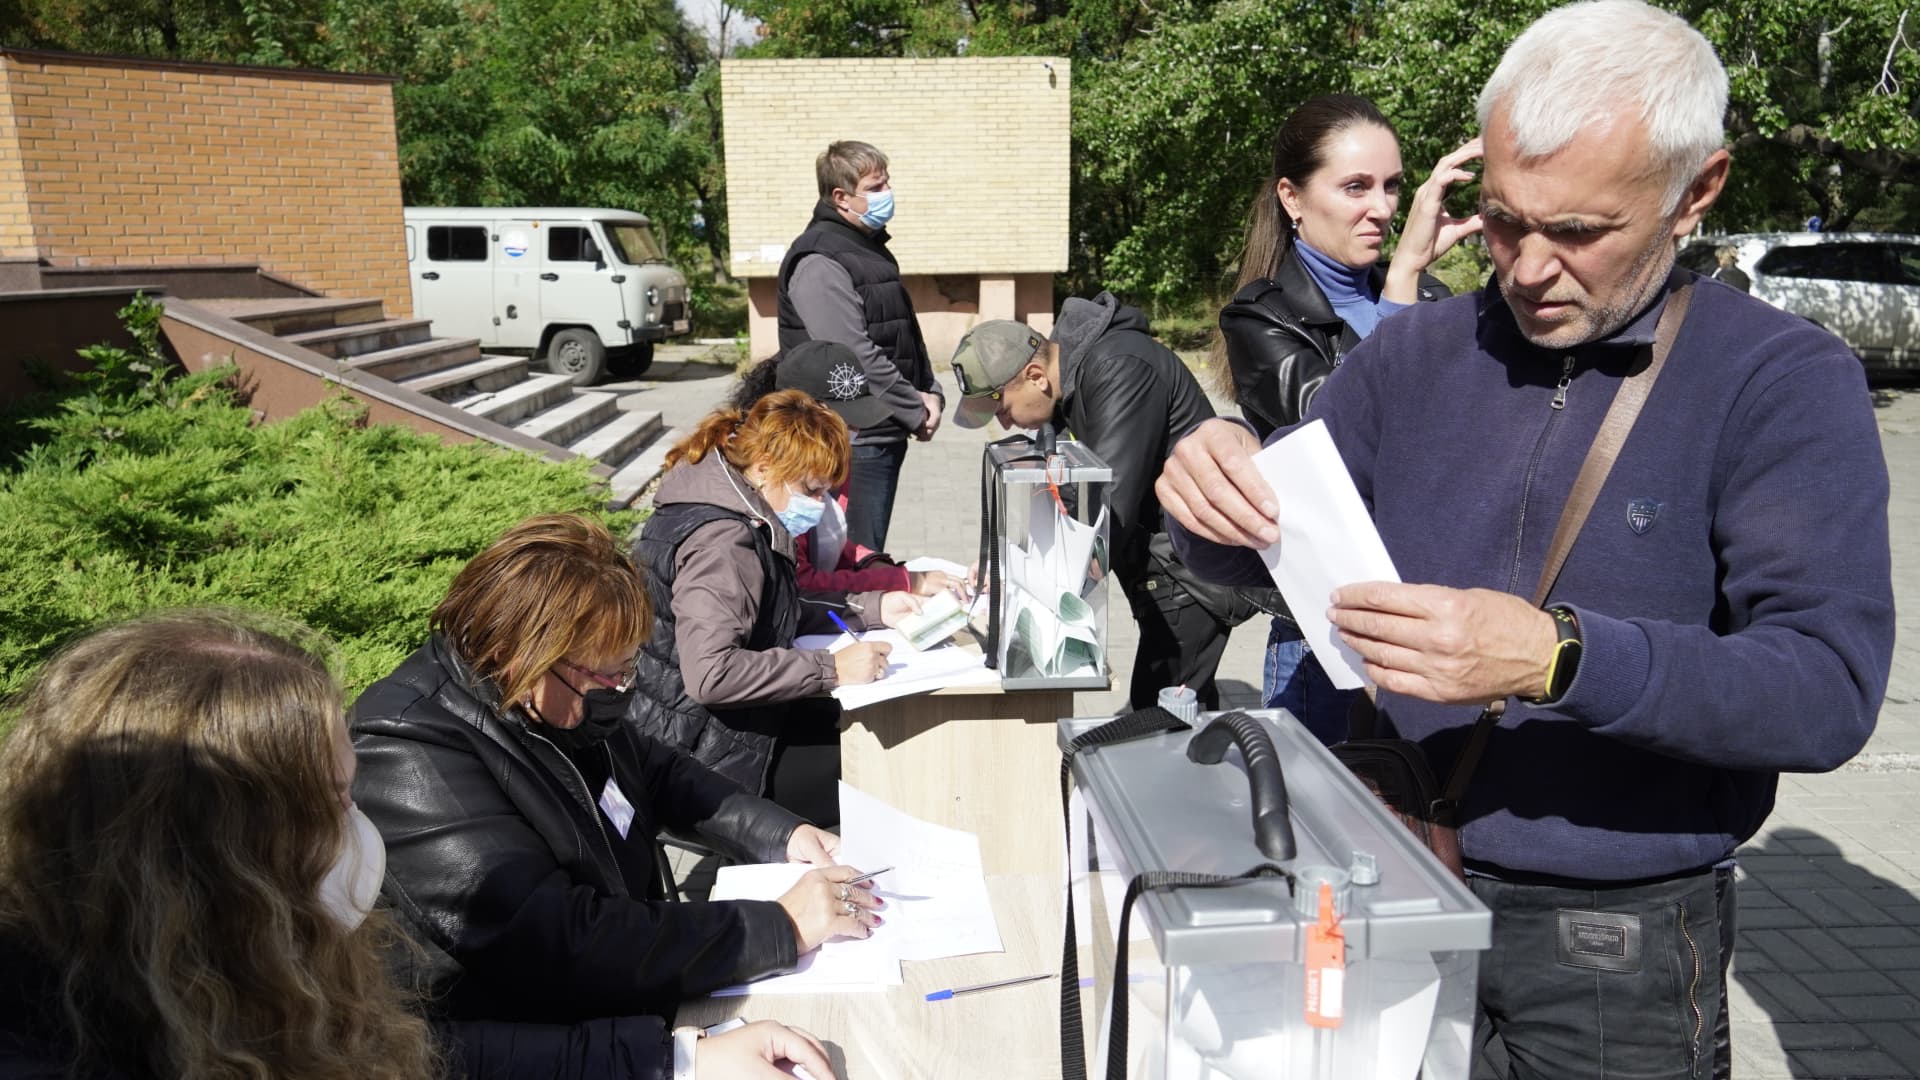 Russia holds elections in illegally occupied parts of Ukraine, including Donetsk, Luhansk, Zaporizhzhia and Kherson.